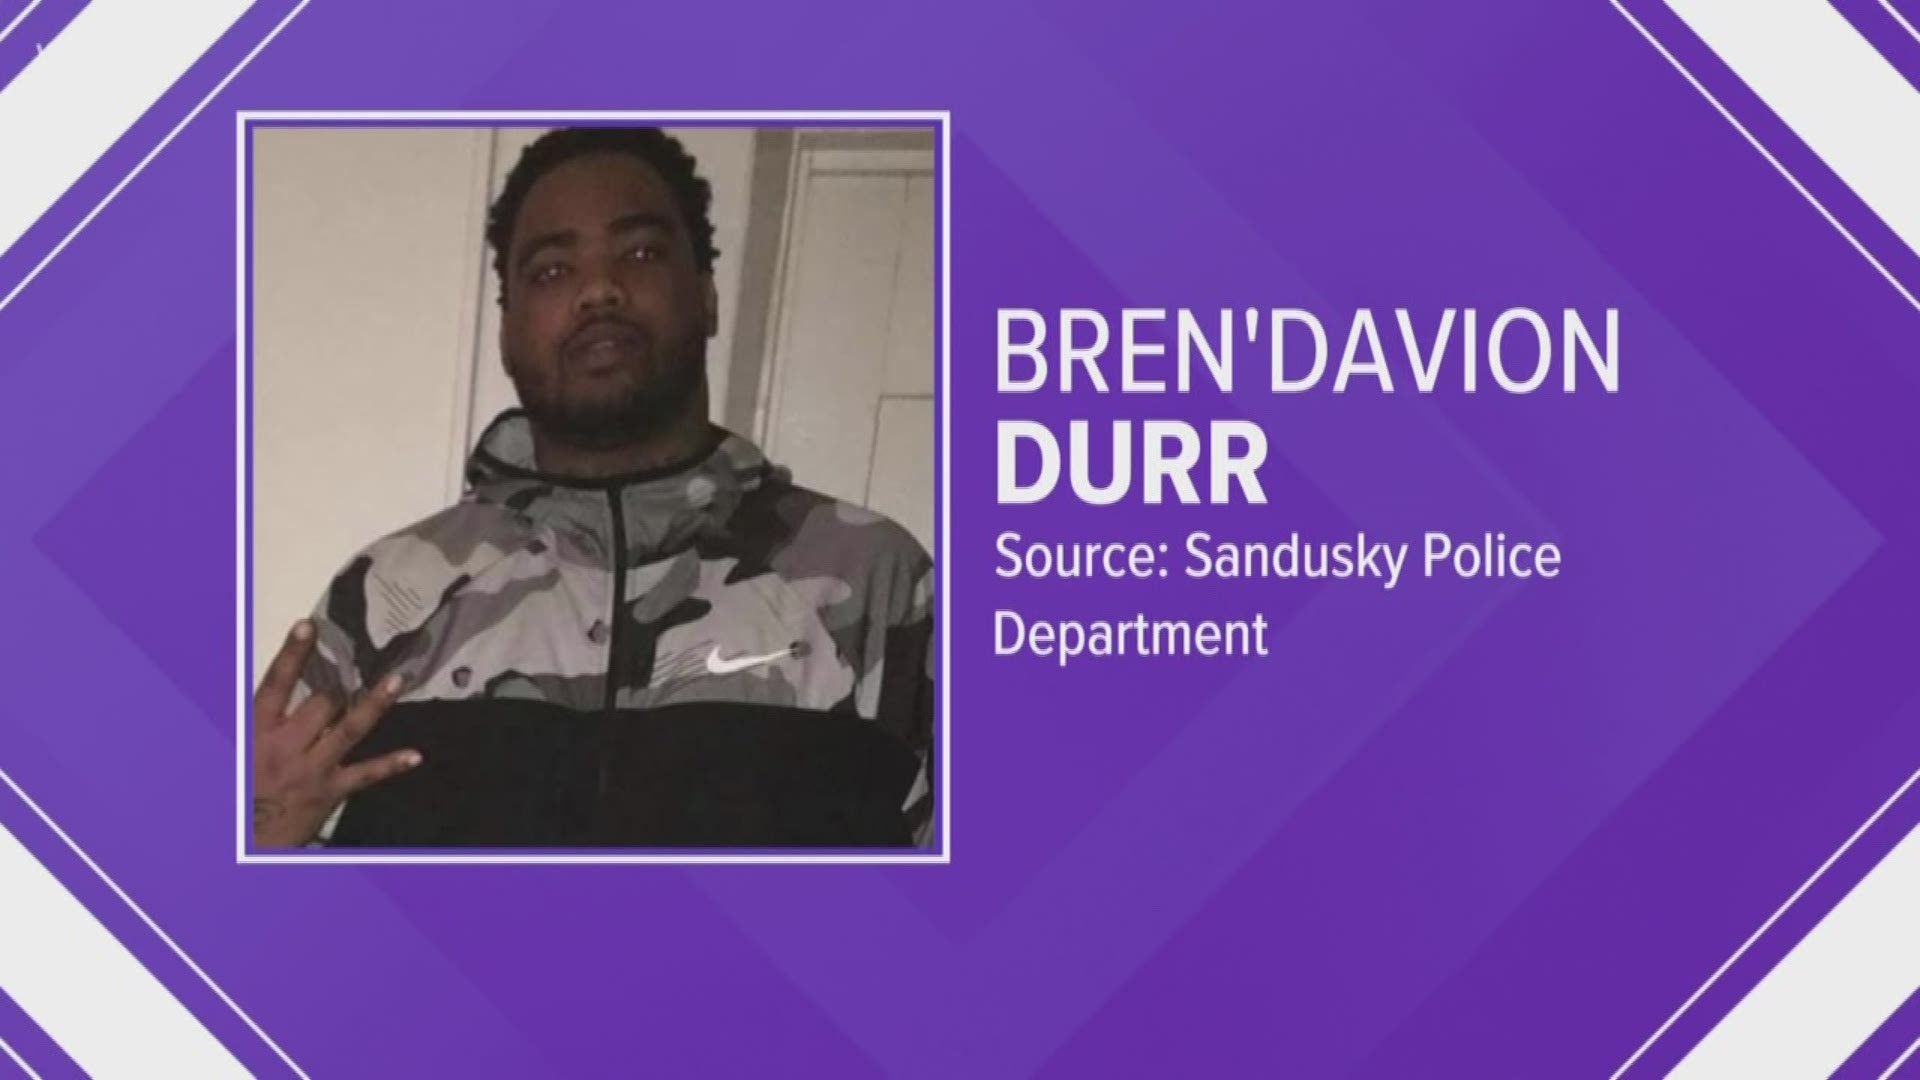 Officers found 2 men suffering from gunshot wounds in an alleyway in Sandusky on Saturday, according to police records.